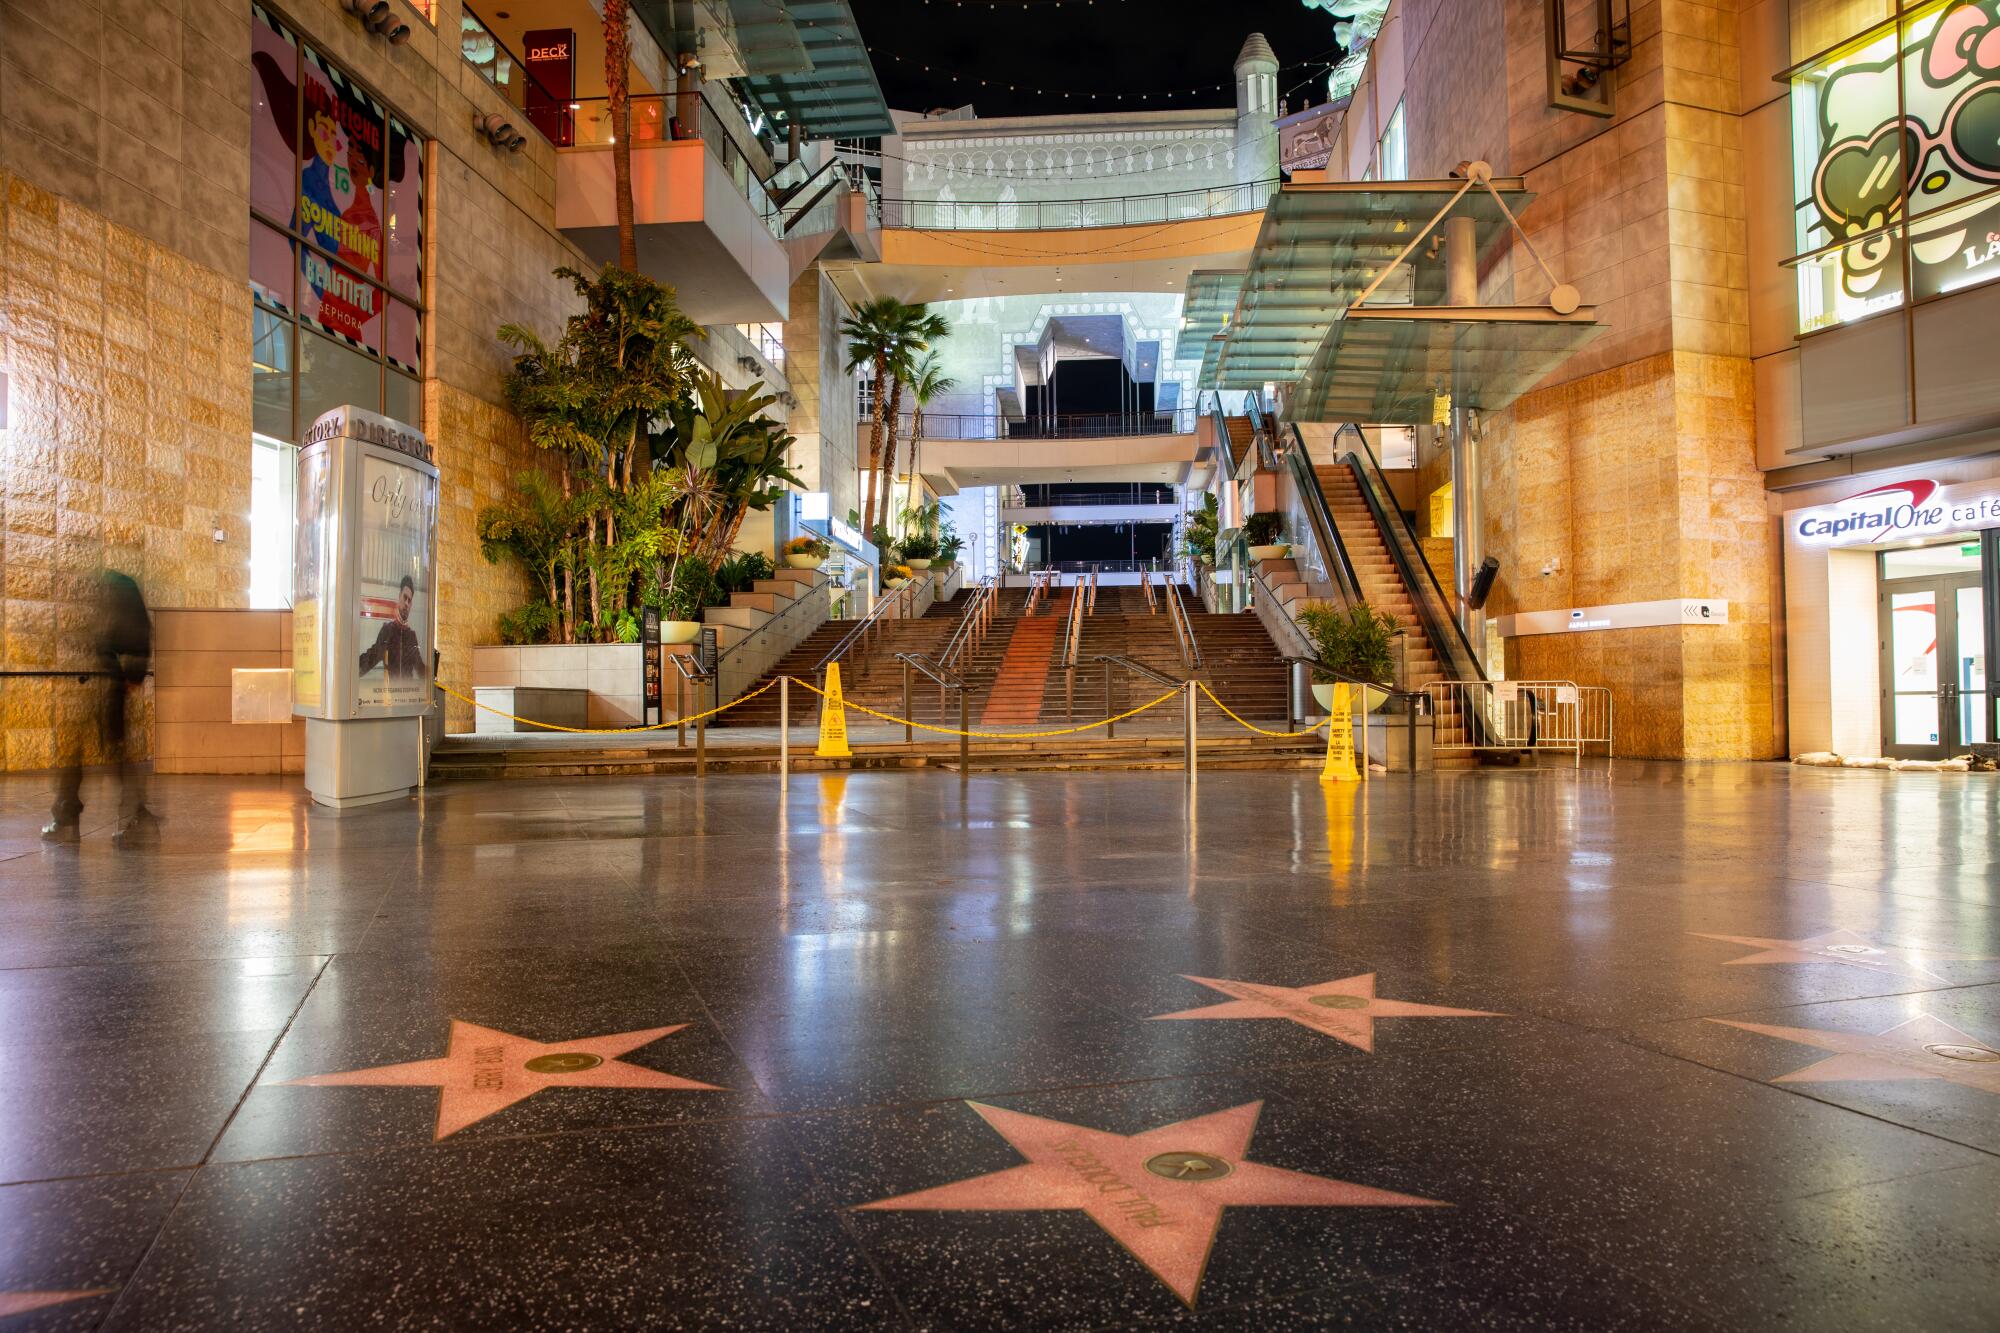 The Hollywood & Highland shopping complex is closed.